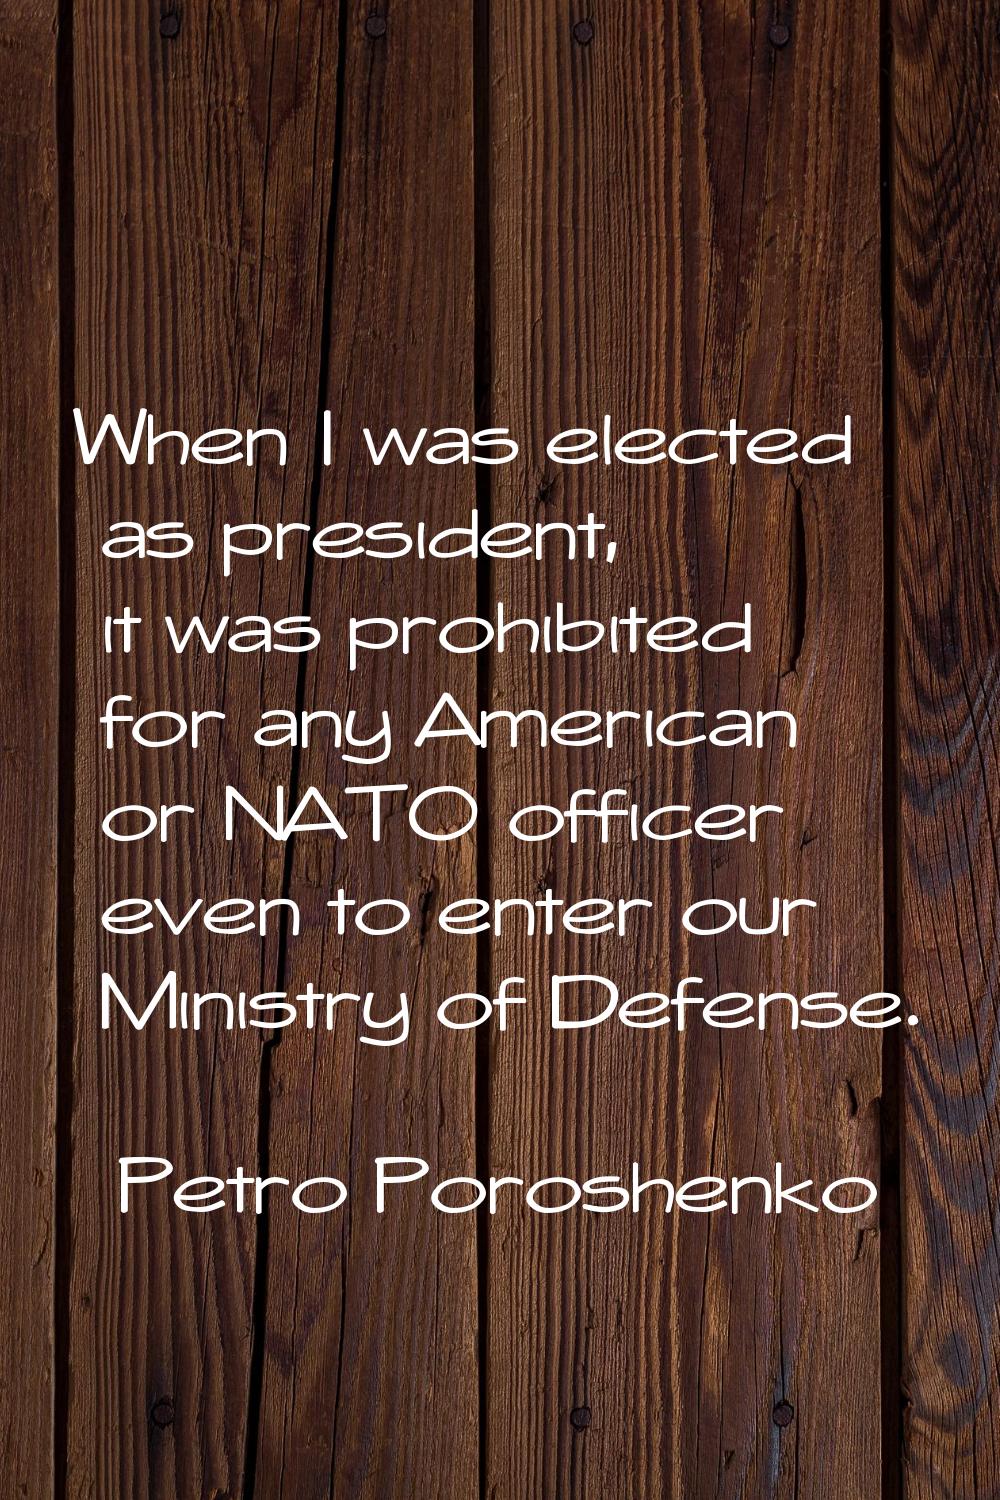 When I was elected as president, it was prohibited for any American or NATO officer even to enter o